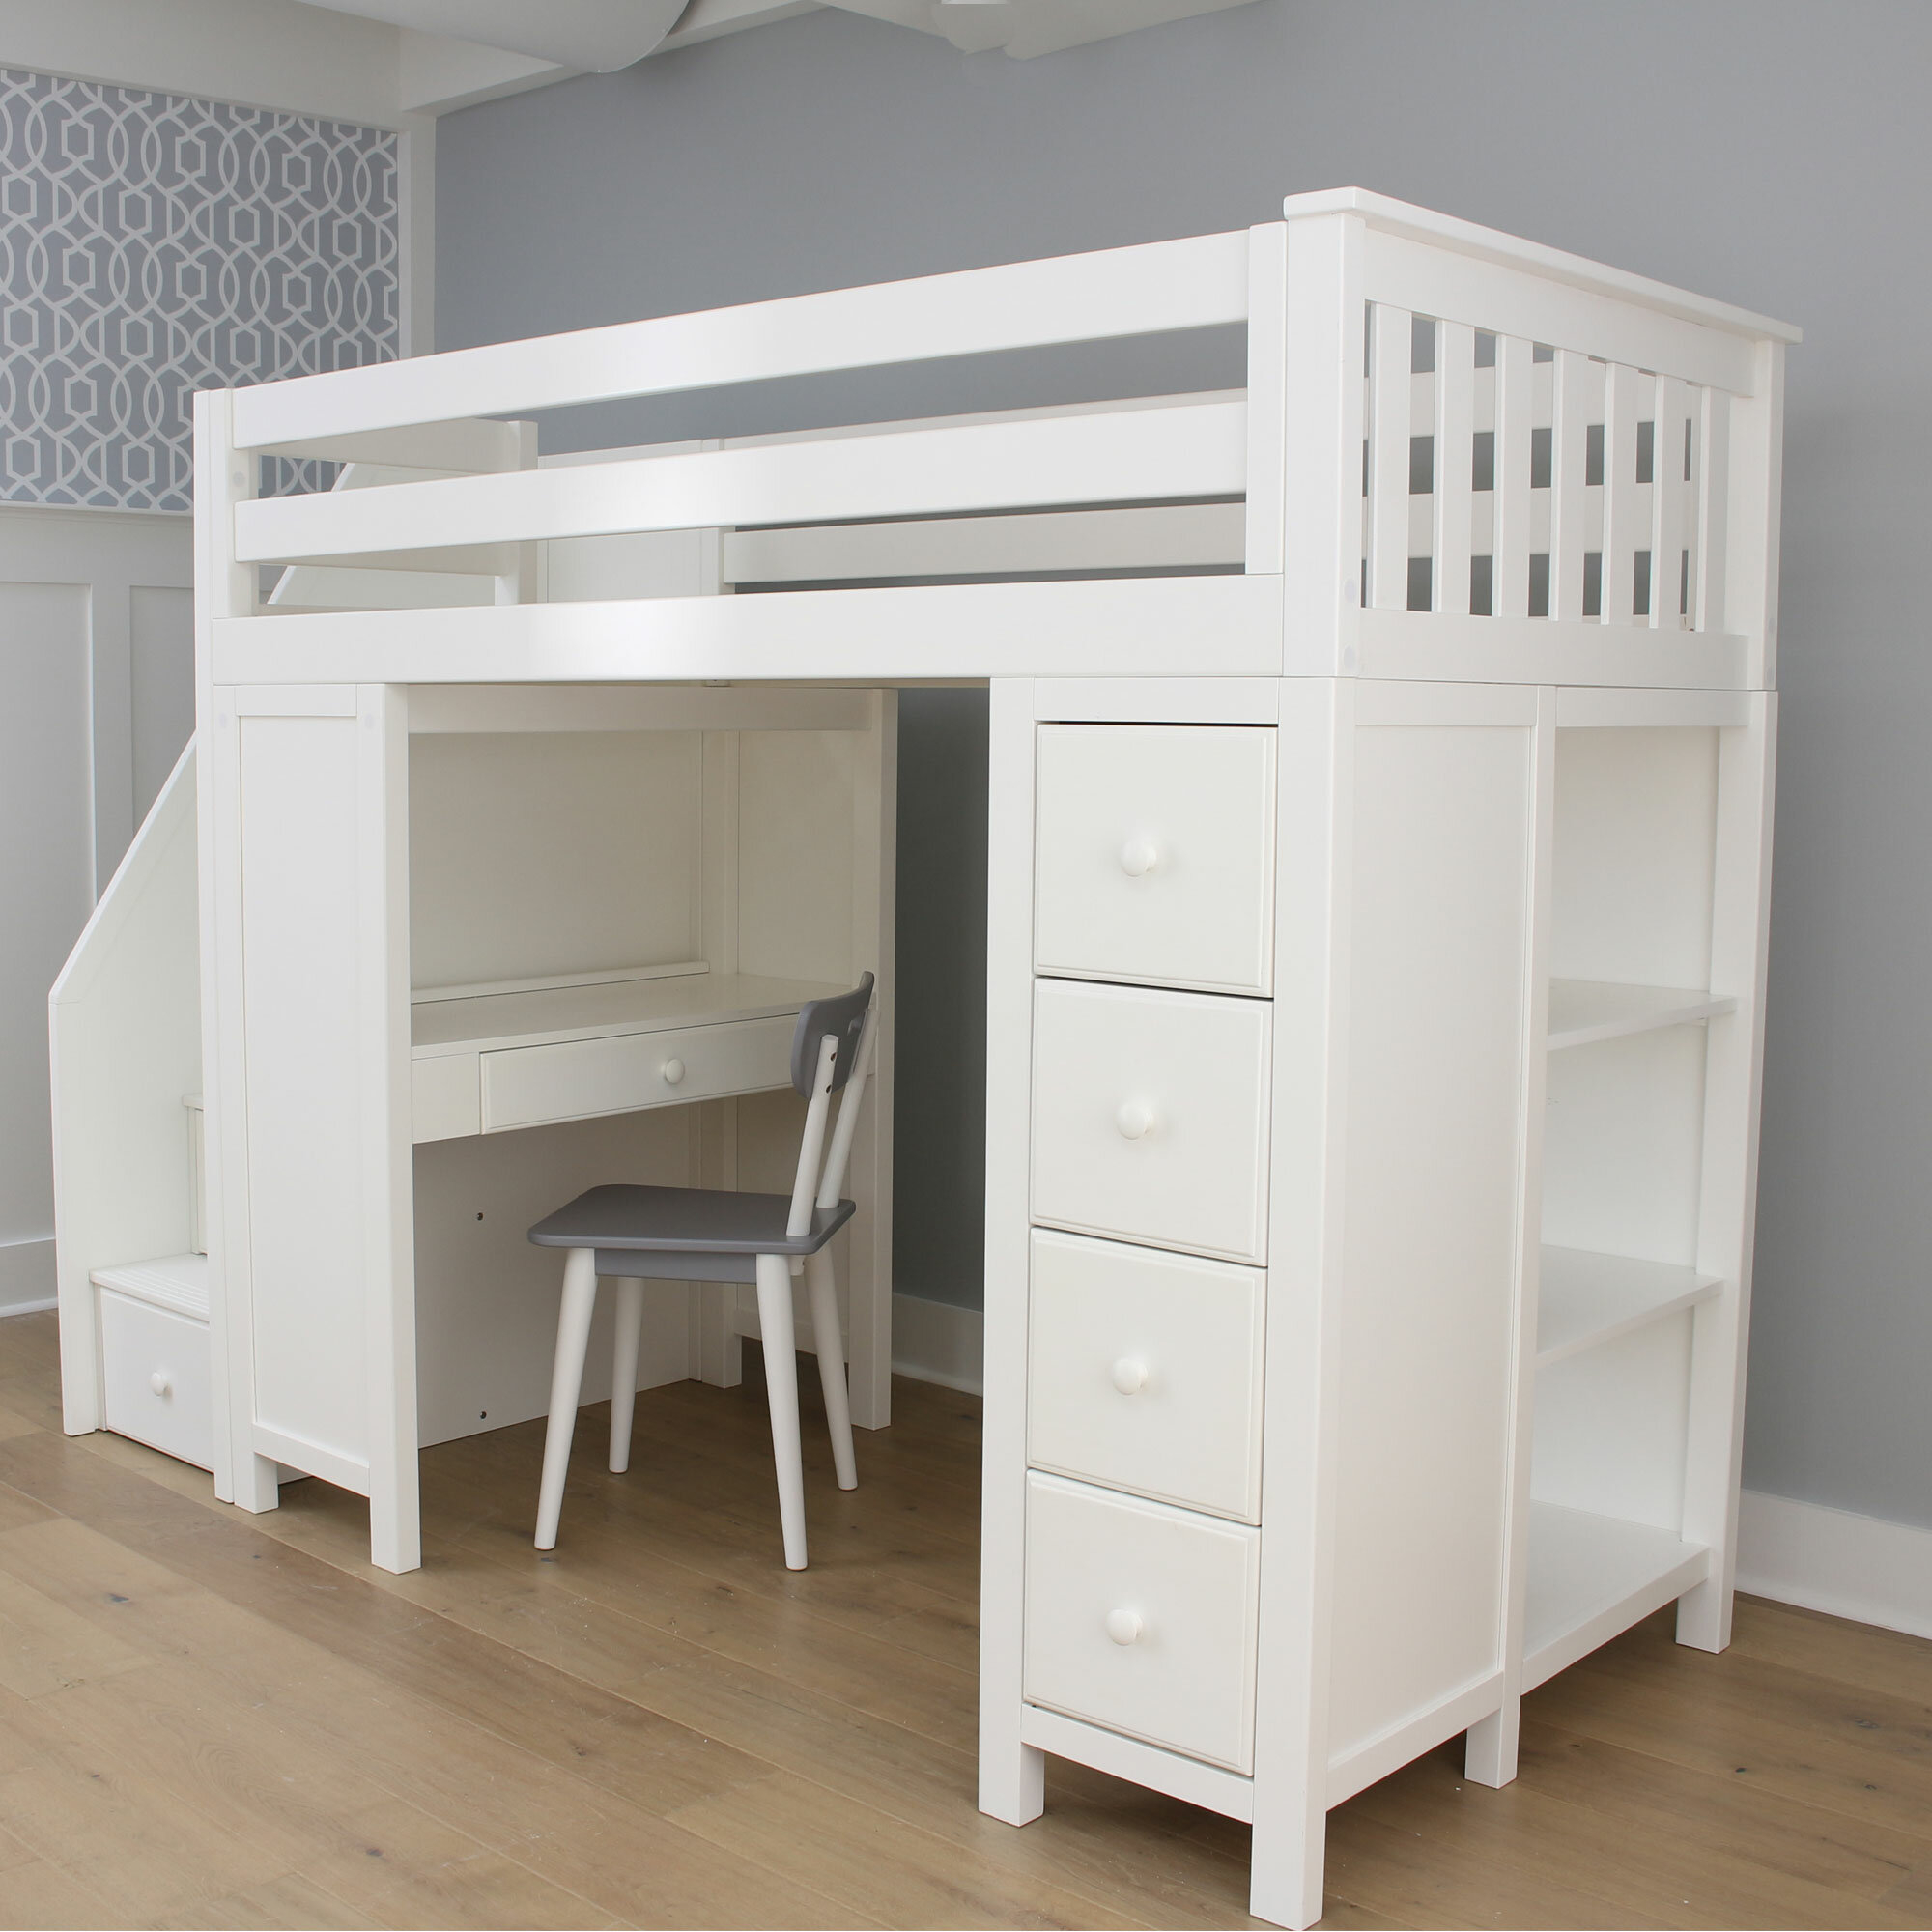 Bunk Beds With Dressers Visualhunt, Bunk Bed With Desk And Drawers Underneath